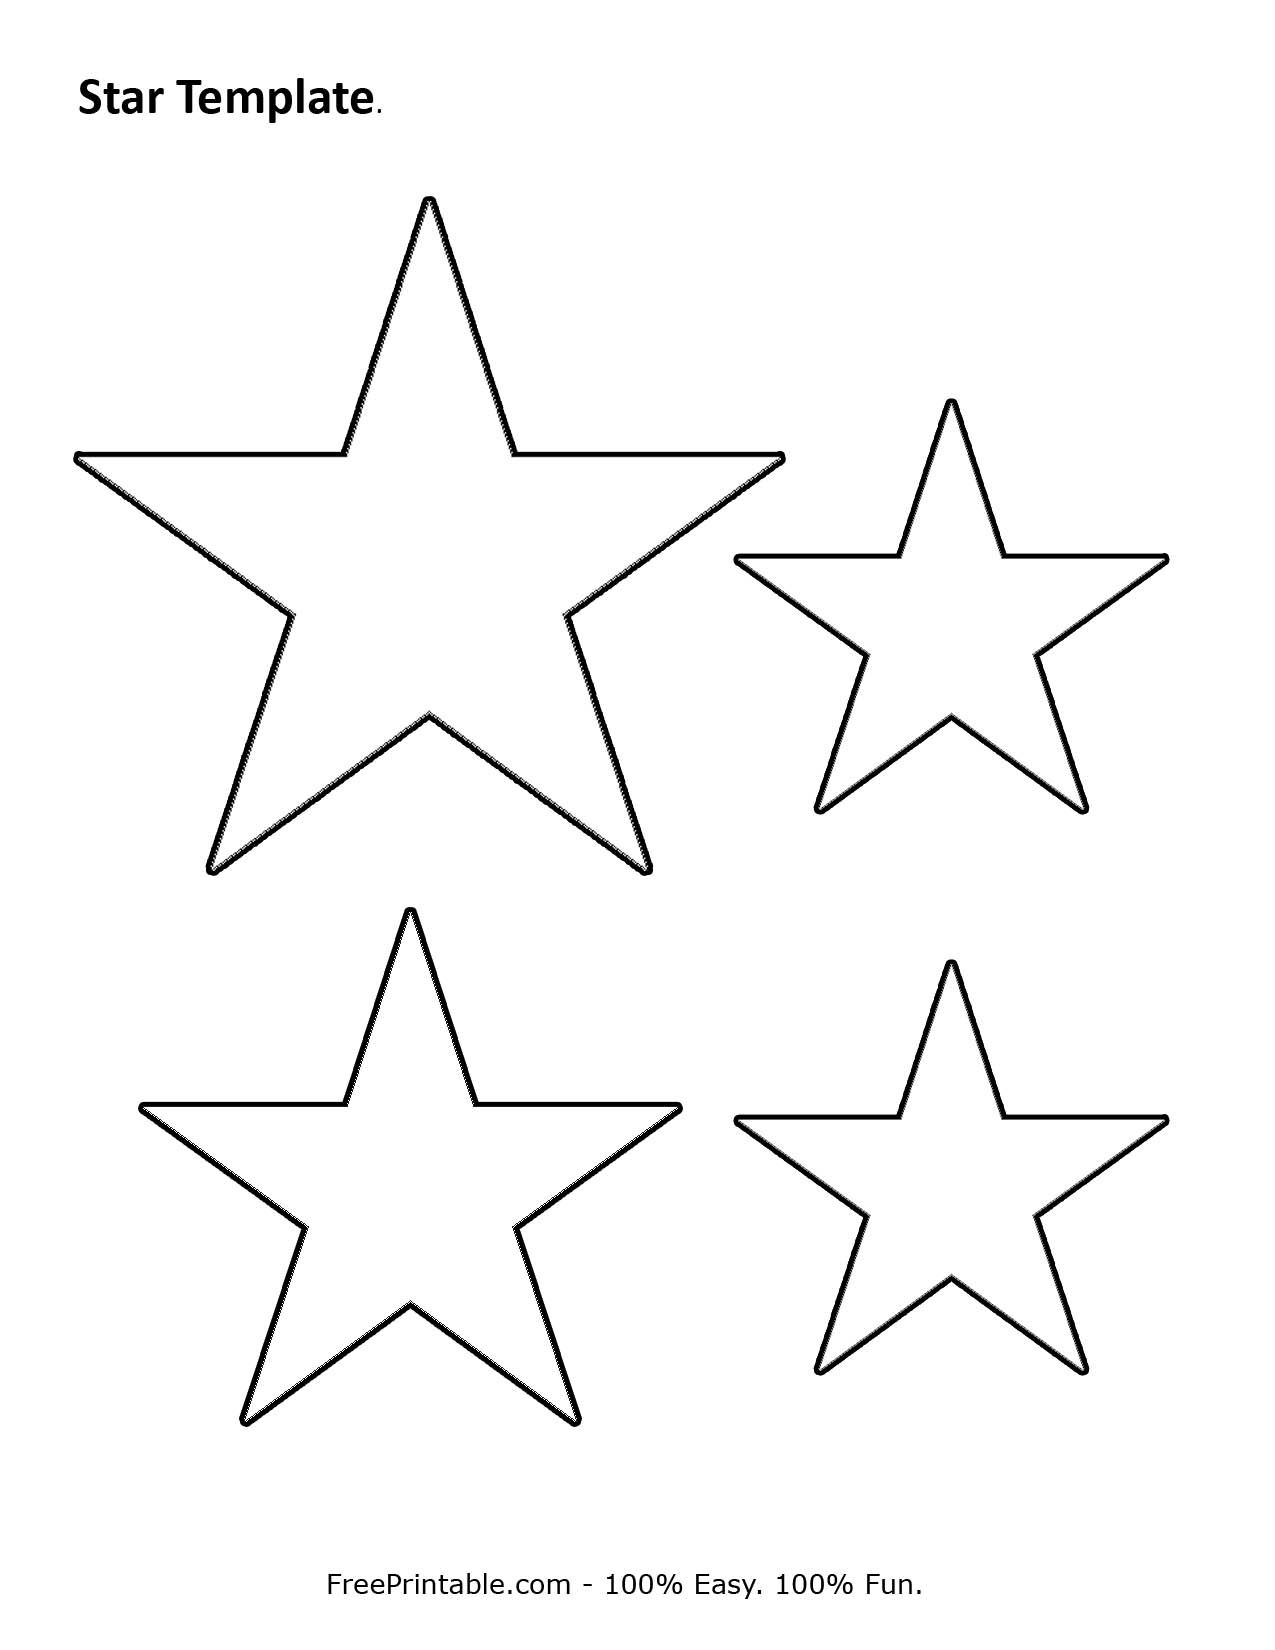 Customize Your Free Printable Star Template | Stencil | Pinterest - Free Printable Stars